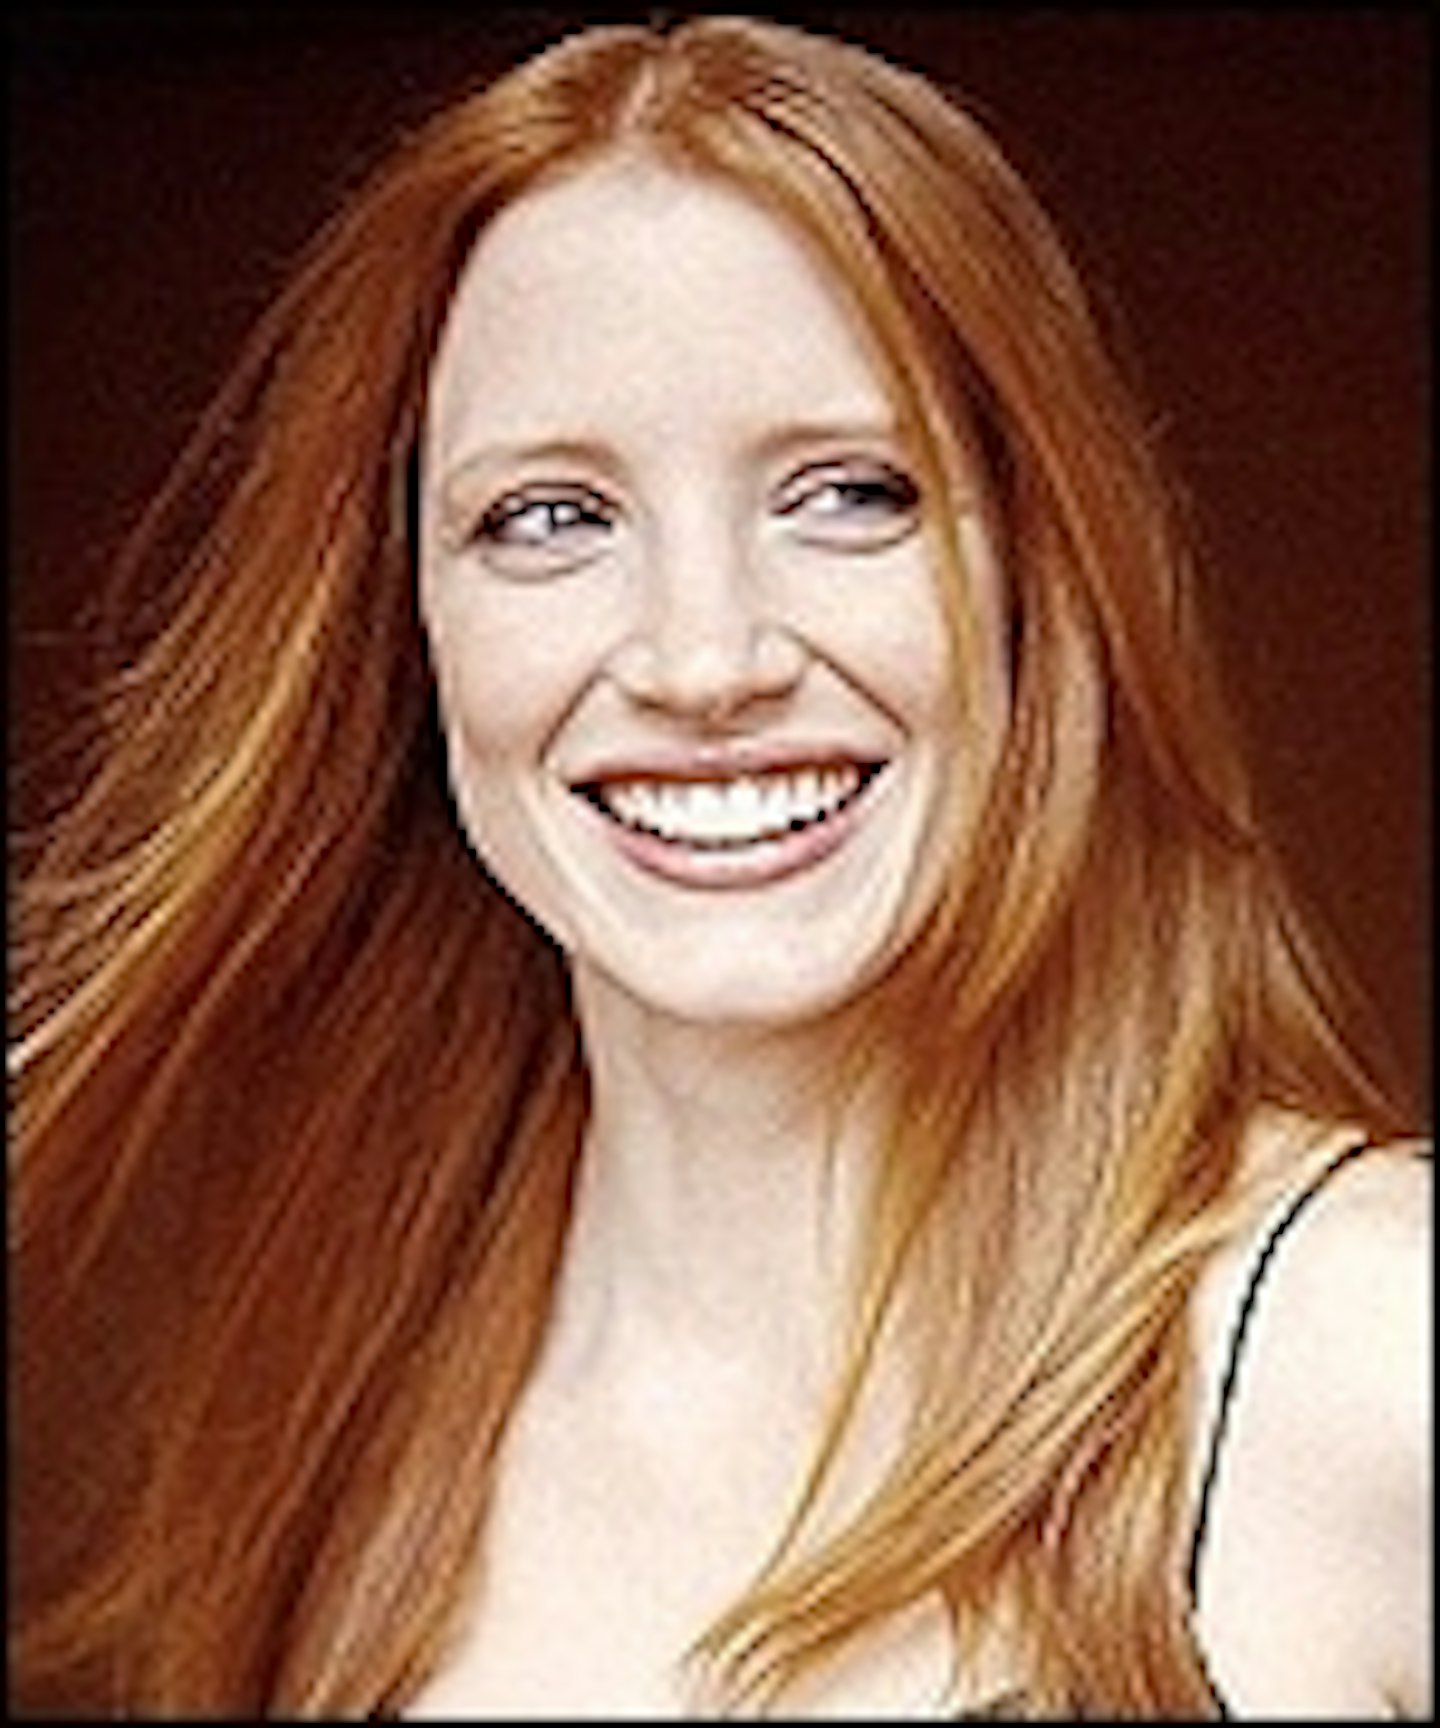 No Jessica Chastain For Iron Man 3